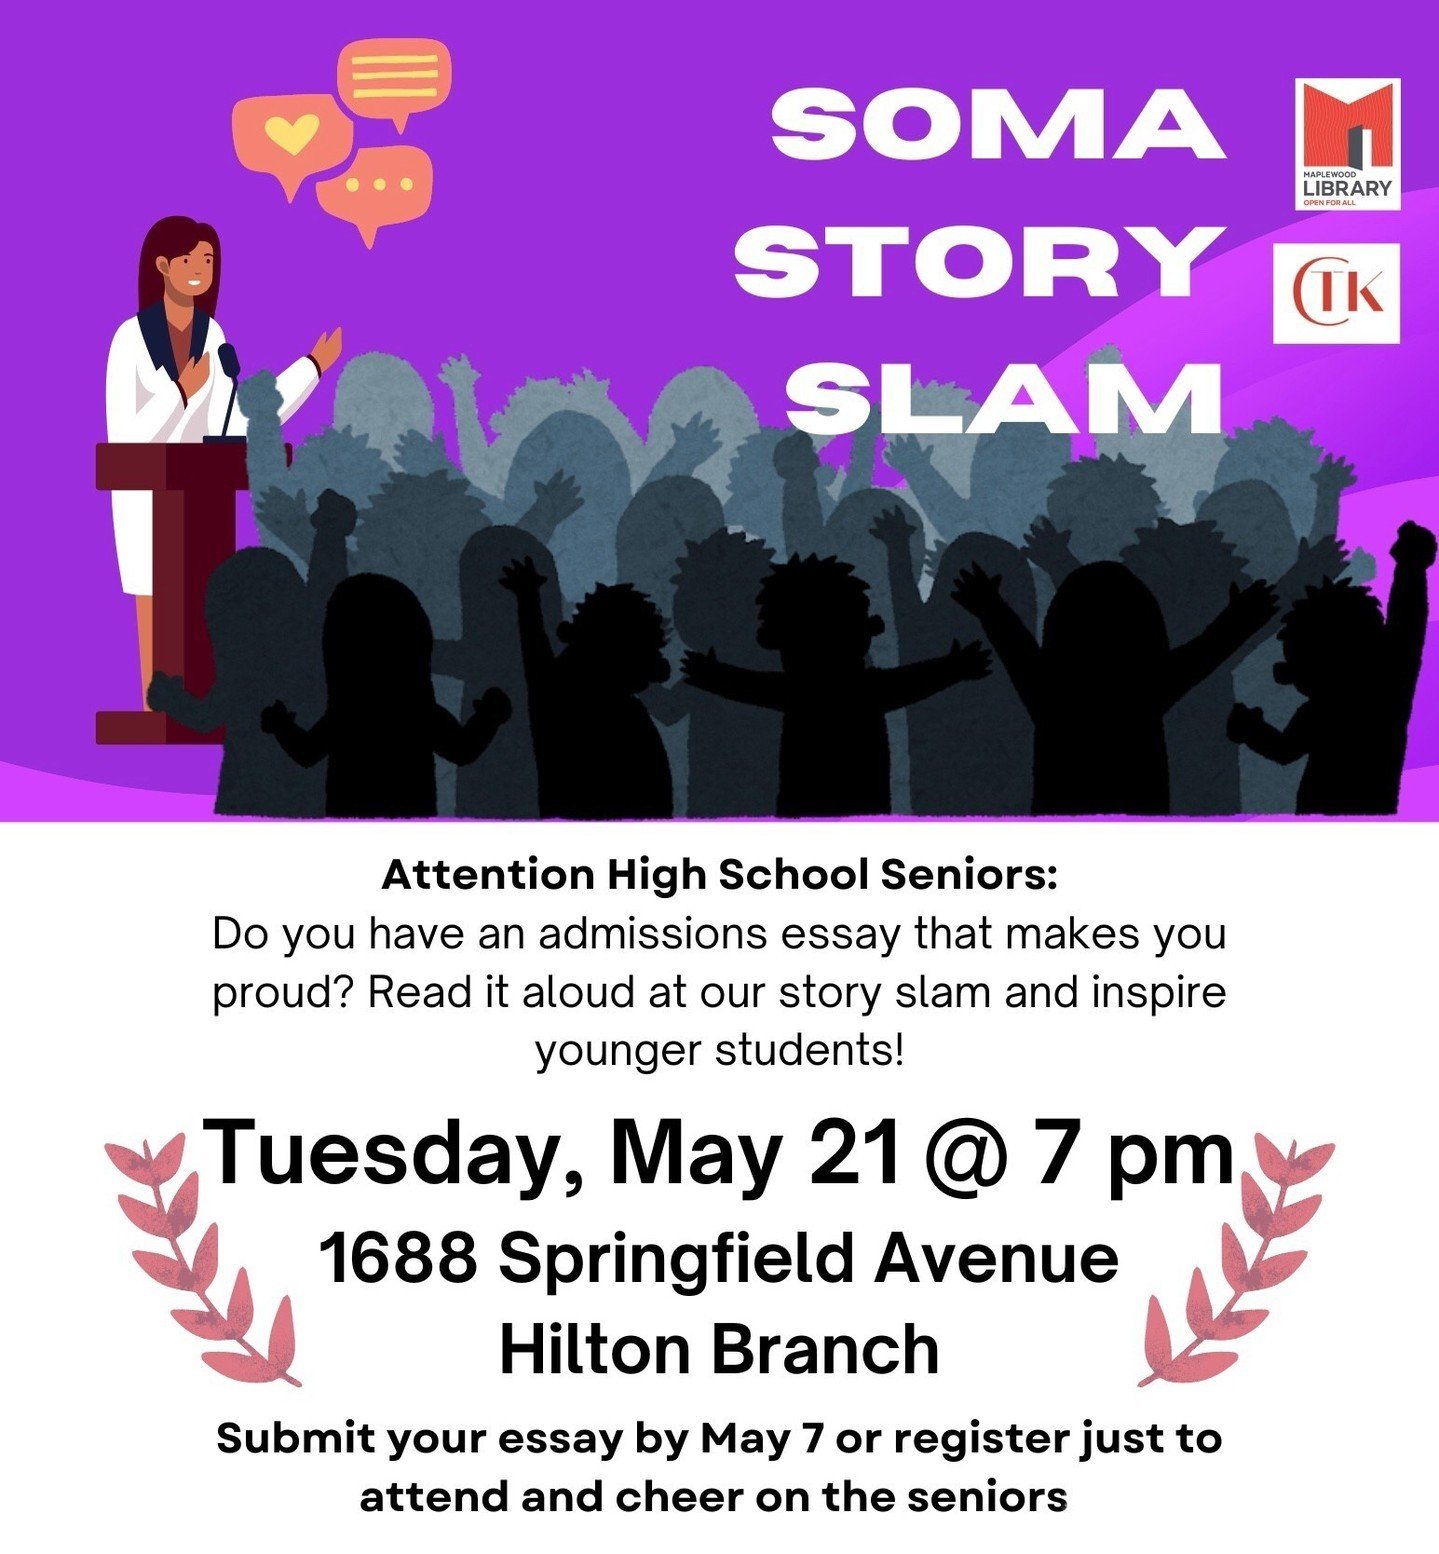 SOMA Story Slam ⁠
📅 Tuesday, May 21⁠
🕖️ 7PM - 8PM⁠
📍 Hilton Branch Library⁠
⁠
Co-hosted by Maplewood Library and CTK College Coach, the second annual SOMA Story Slam celebrates graduating high school seniors as they transition to college. Are you 